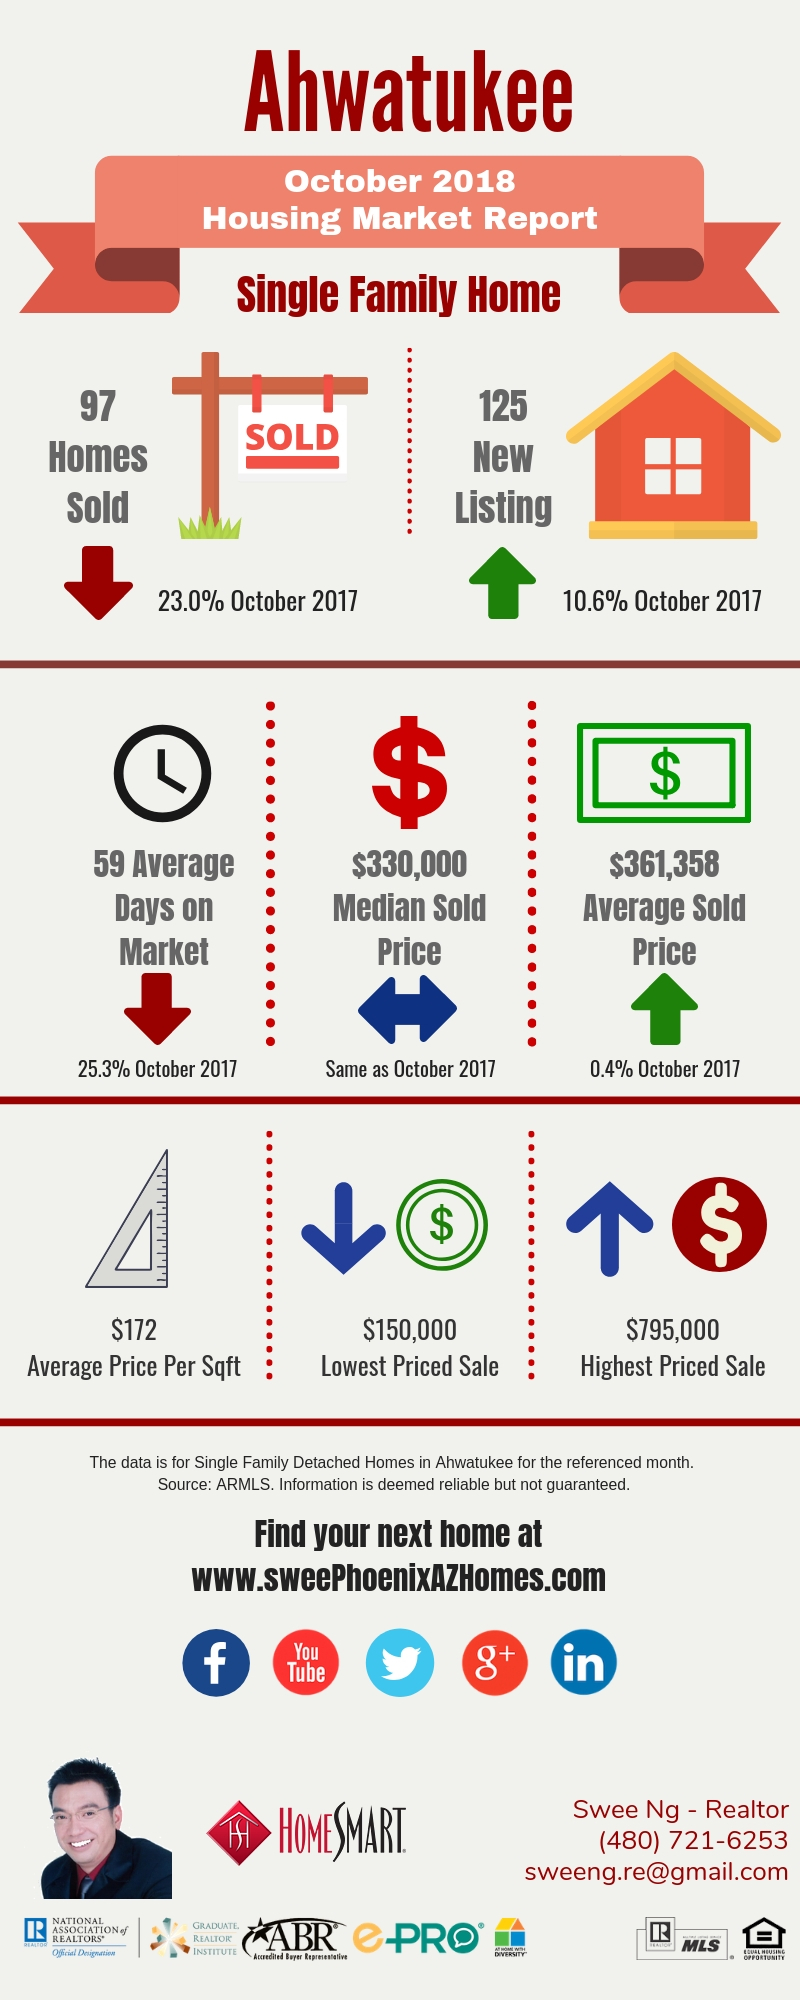 Ahwatukee Housing Market Trends Report October 2018, House Value, Real Estate and Statistic by Swee Ng